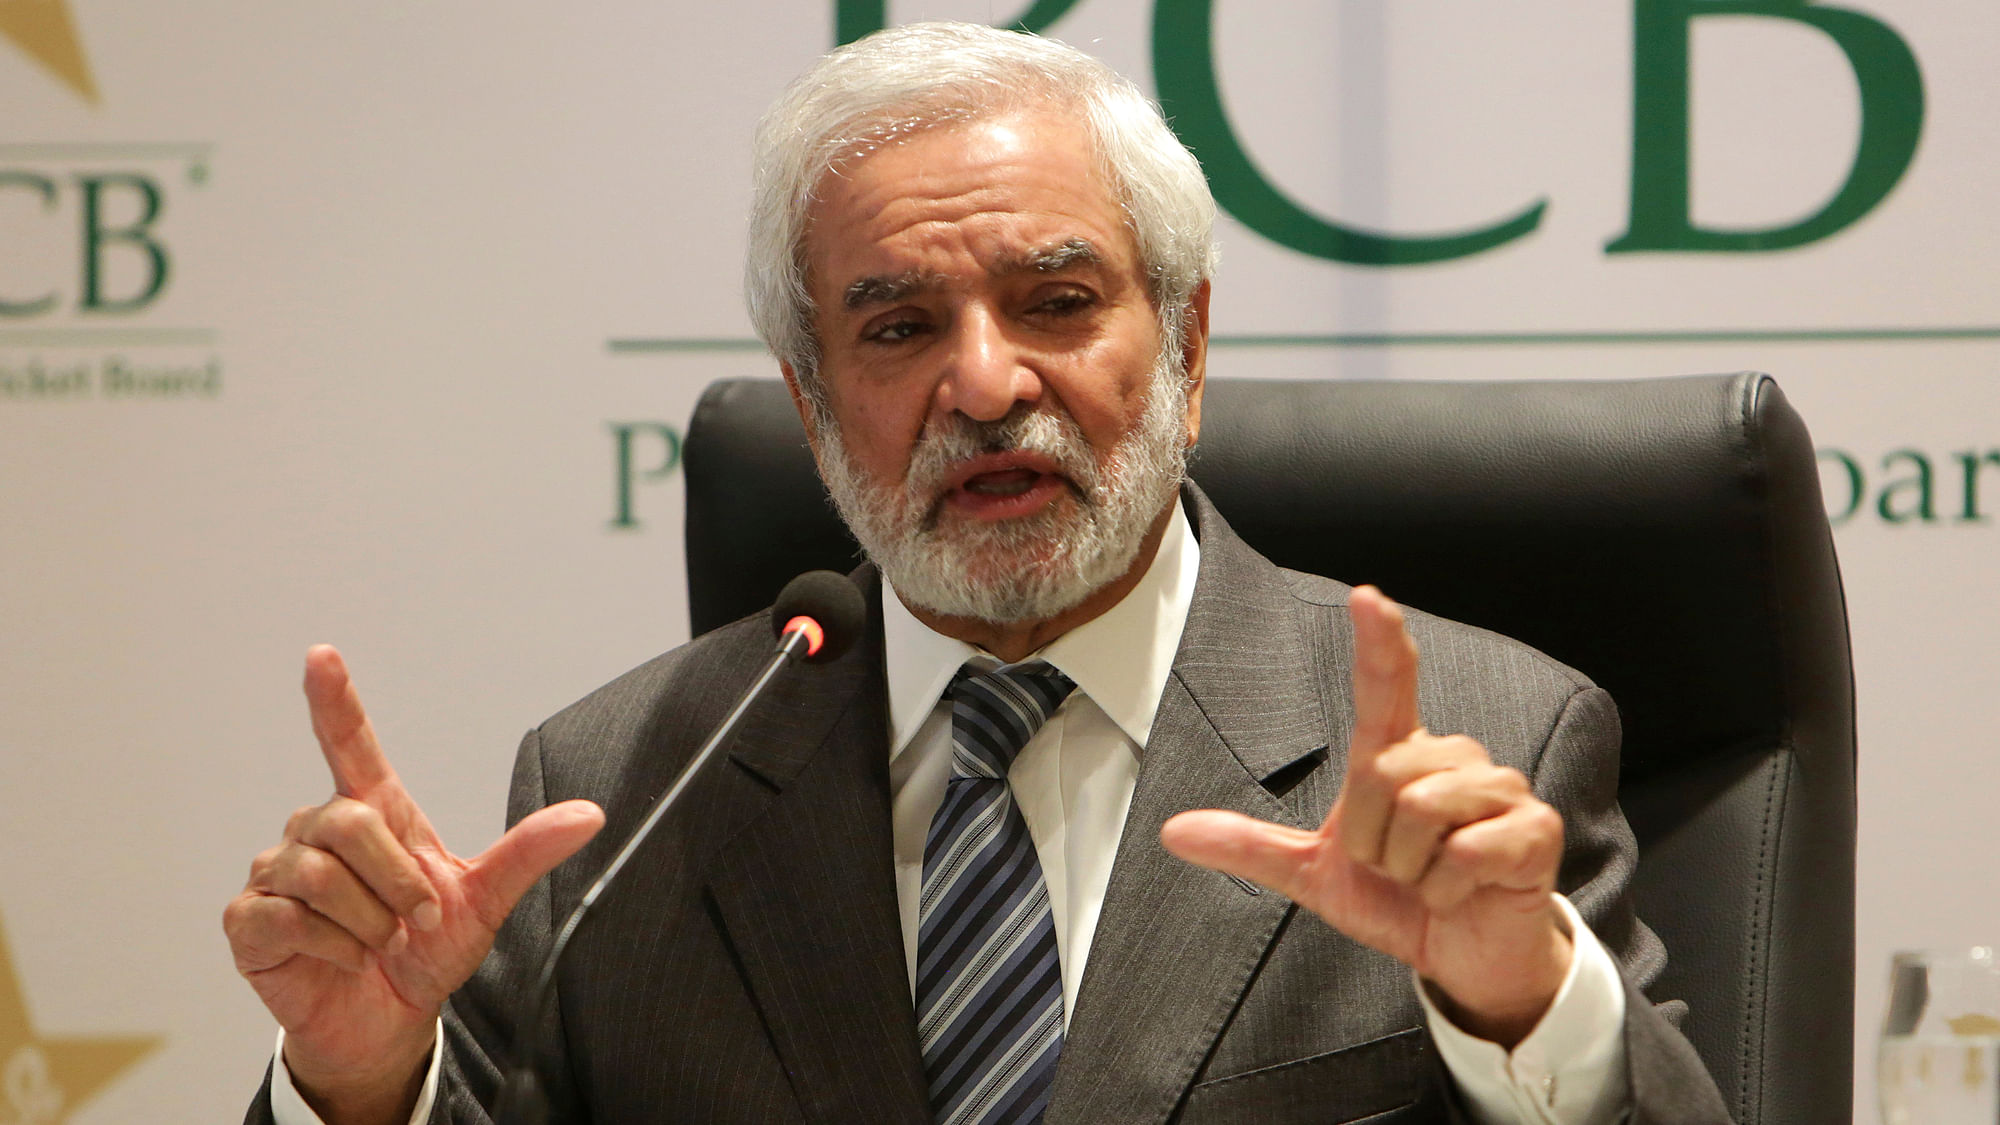 Newly elected Chairman of Pakistan Cricket Board Ehsan Mani addresses a news conference in Lahore, Pakistan.